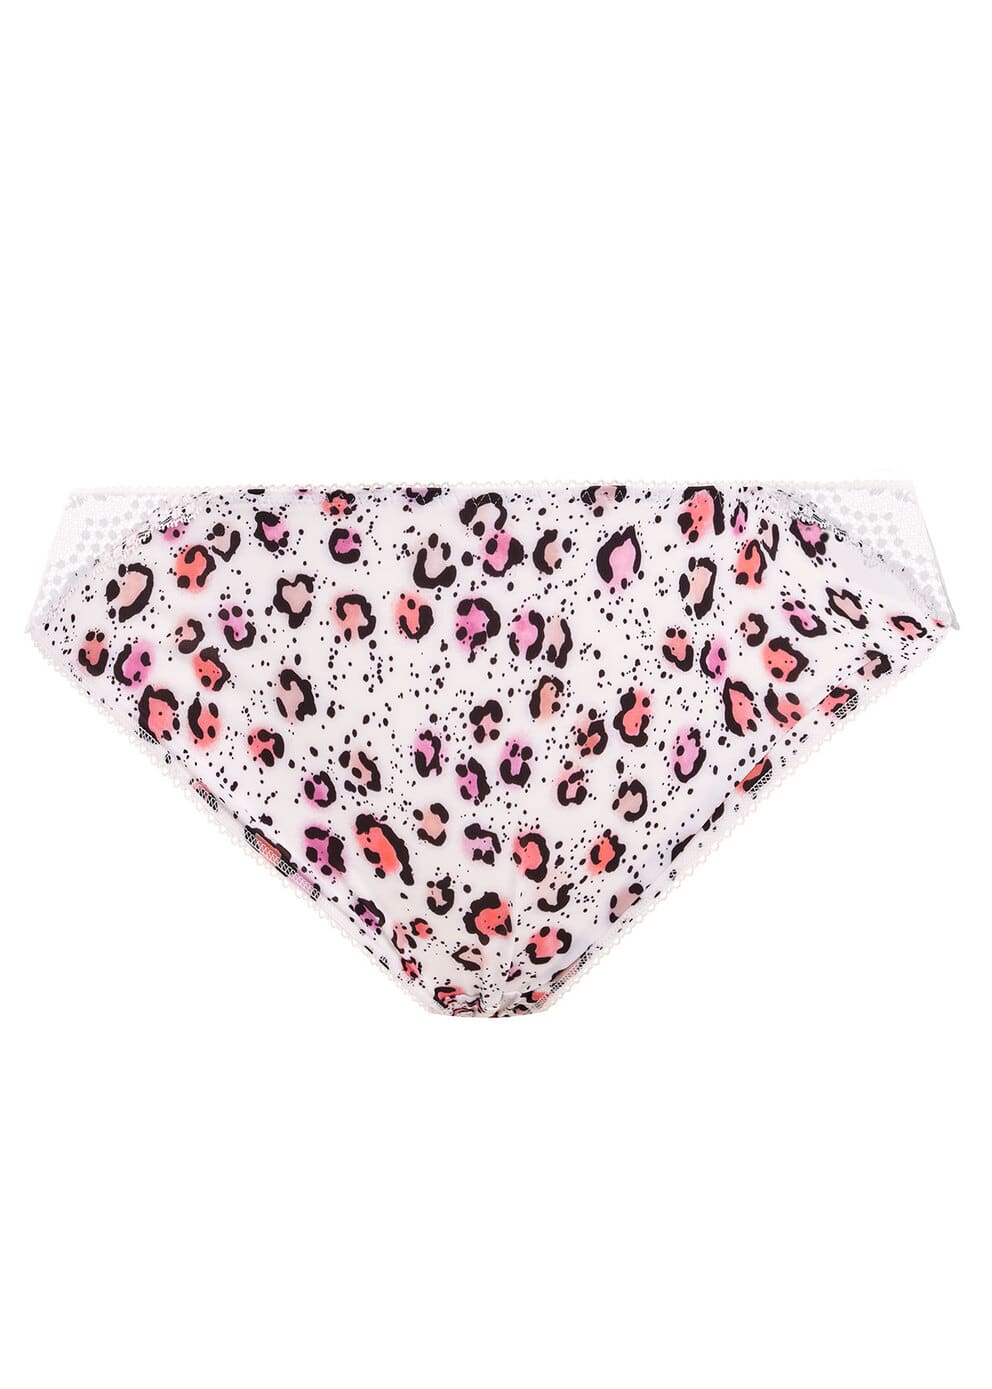 Elomi Lucie Brief - Wild Thing